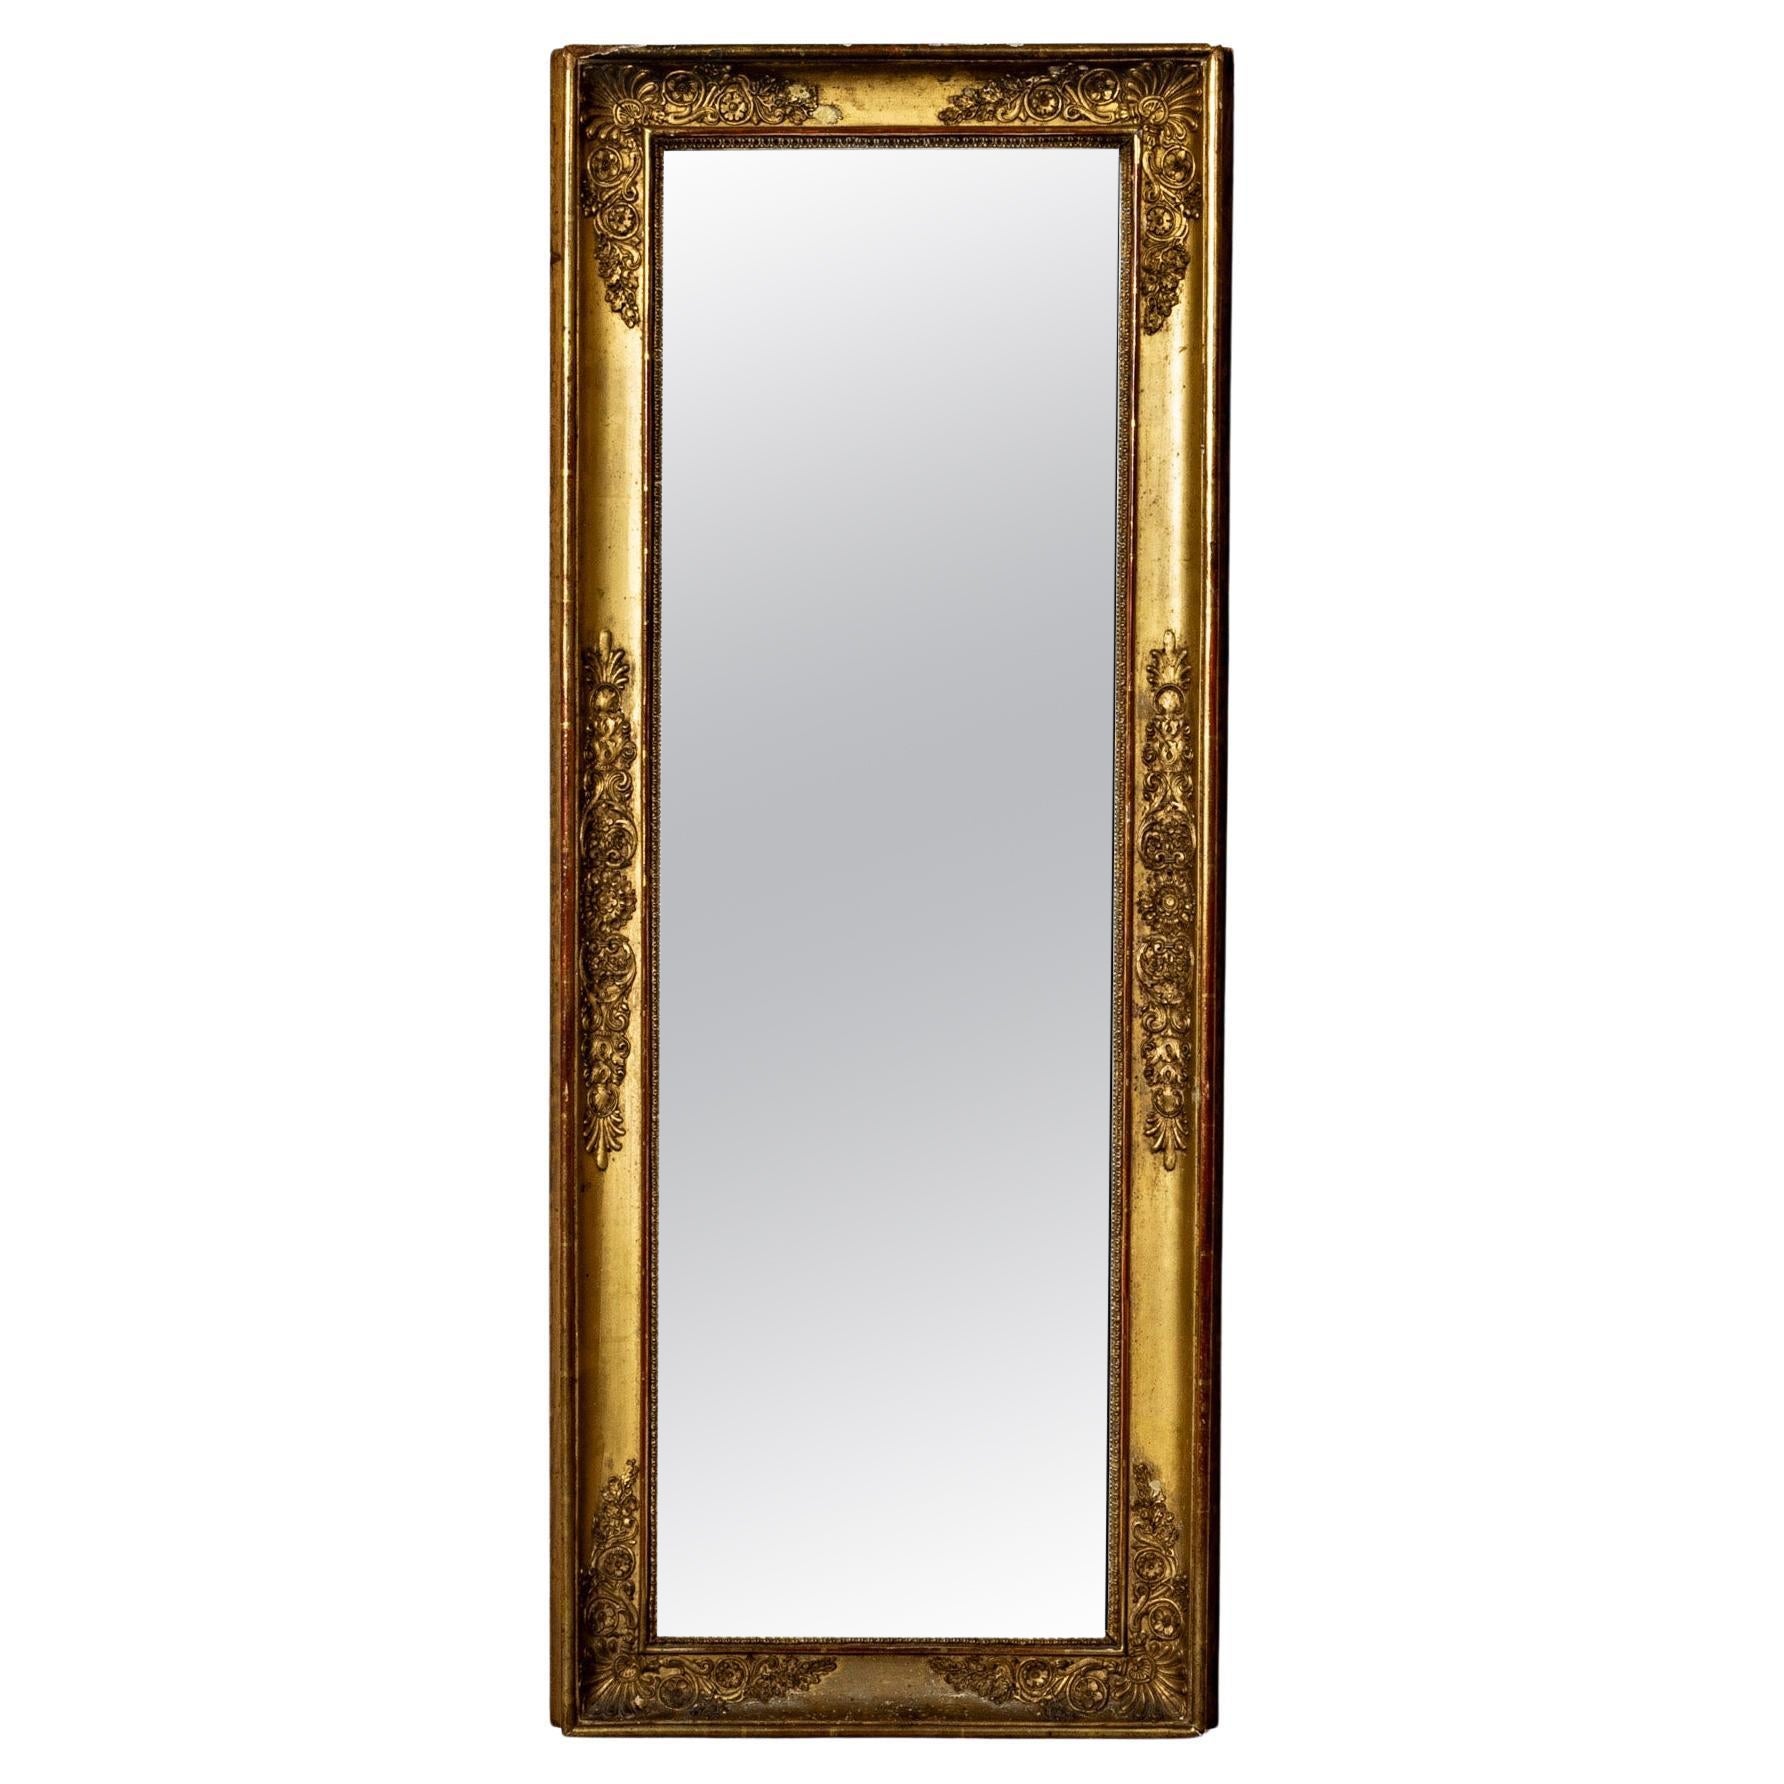 Narrow Early 19th Century French Restauration Period Giltwood Mirror For Sale